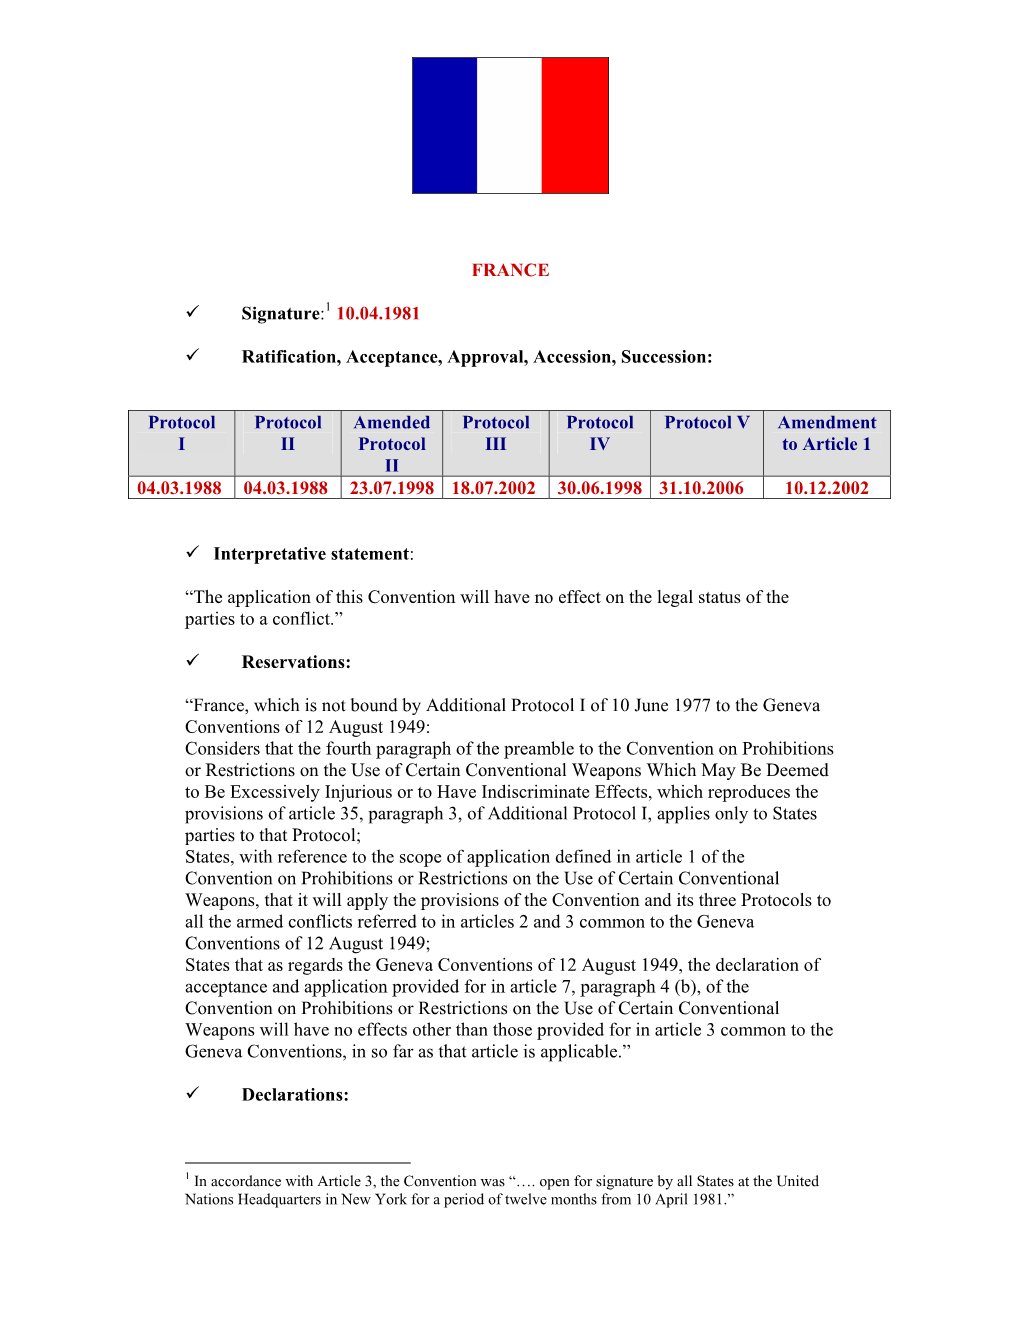 FRANCE Signature:1 10.04.1981 Ratification, Acceptance, Approval